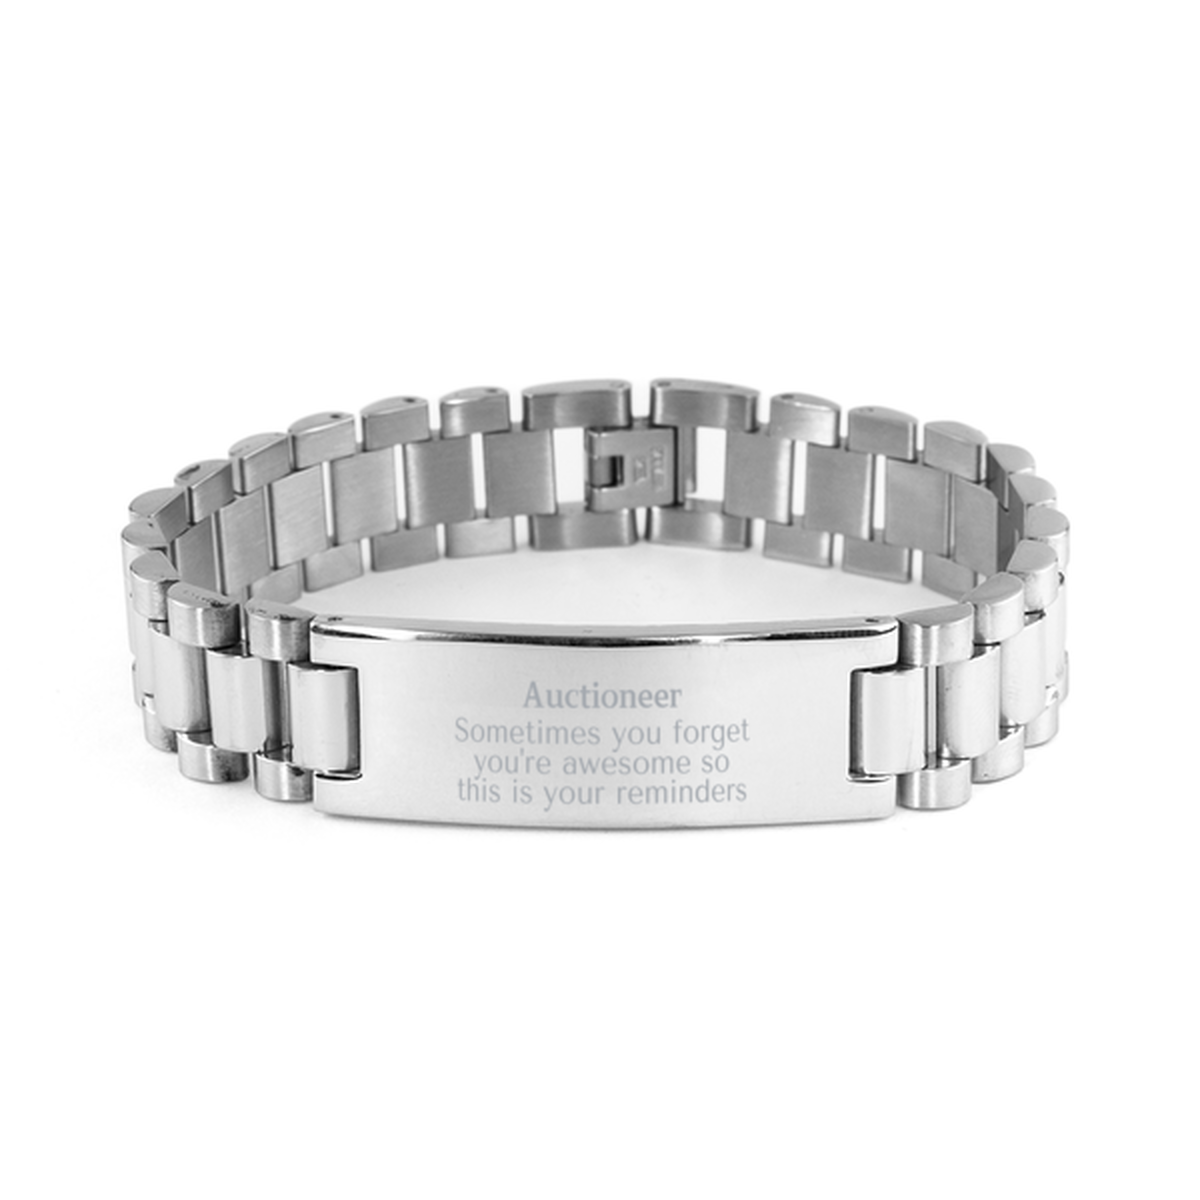 Sentimental Auctioneer Ladder Stainless Steel Bracelet, Auctioneer Sometimes you forget you're awesome so this is your reminders, Graduation Christmas Birthday Gifts for Auctioneer, Men, Women, Coworkers